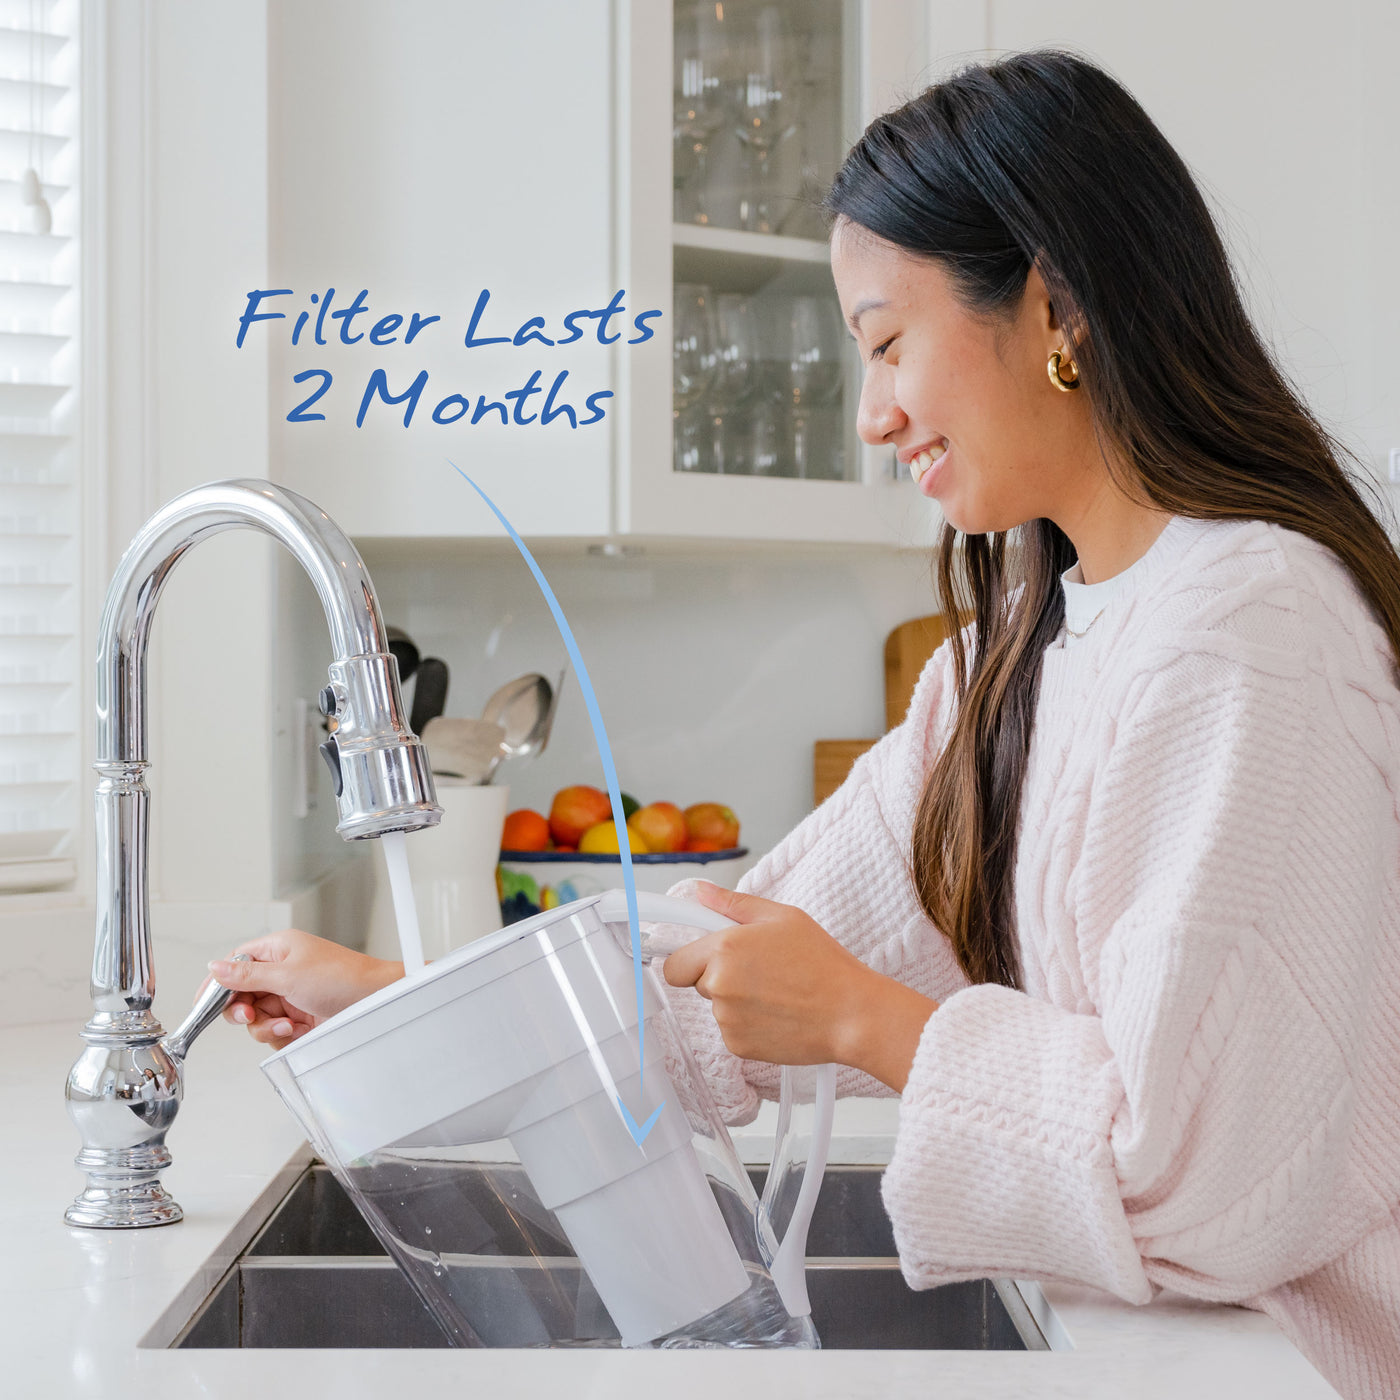 The Santevia MINA Alkaline Pitcher filters will last for 2 months#colour_white